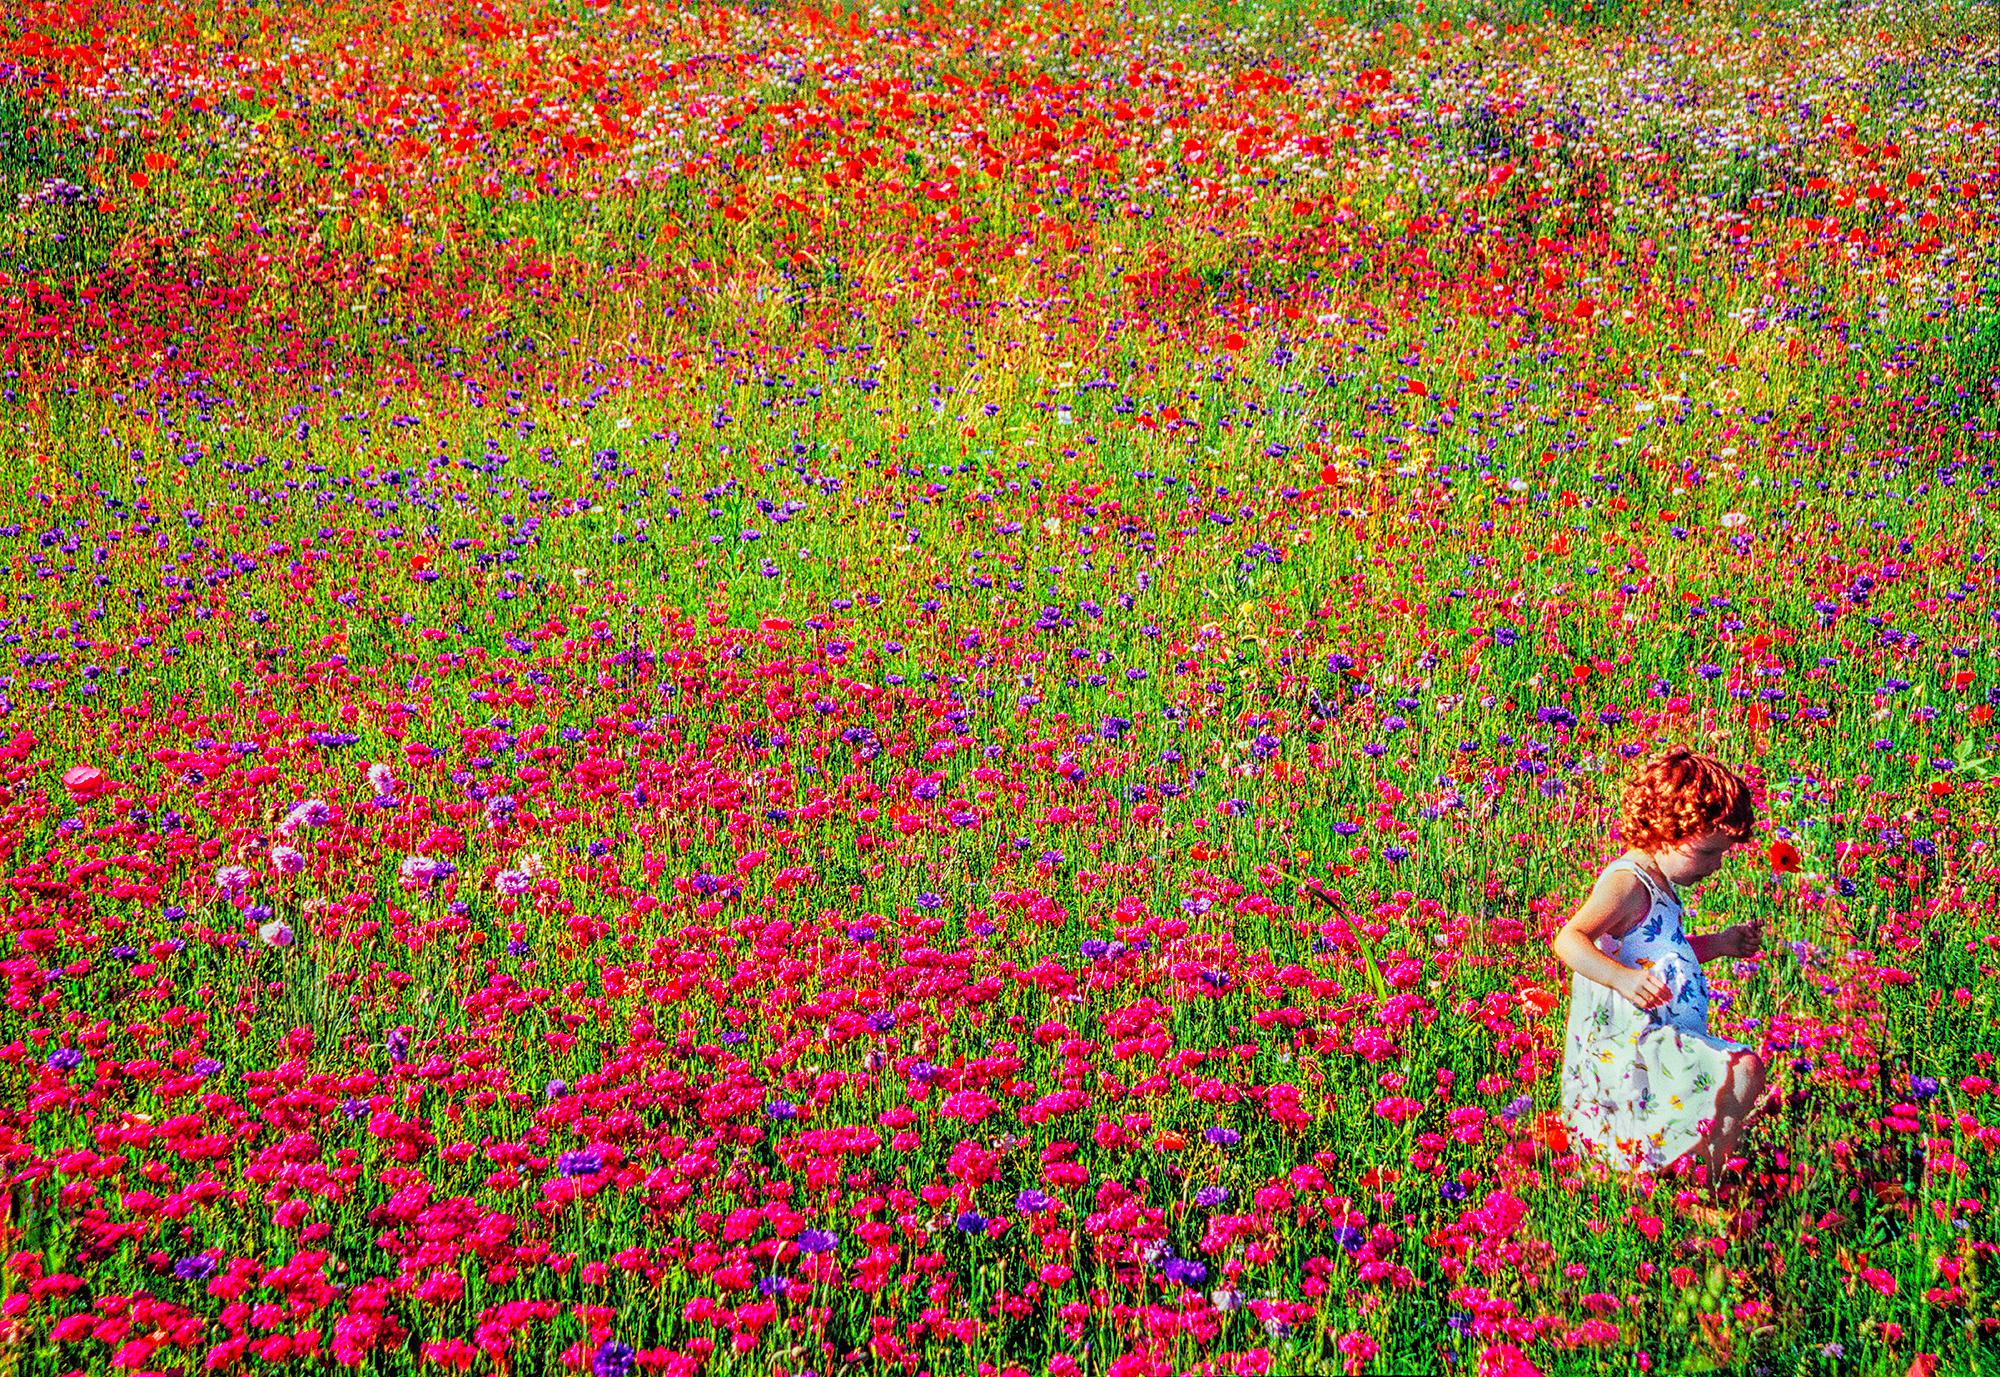 Mitchell Funk Abstract Photograph - Colorful Field of Flowers with Redhead Child - East Hampton Like Monet